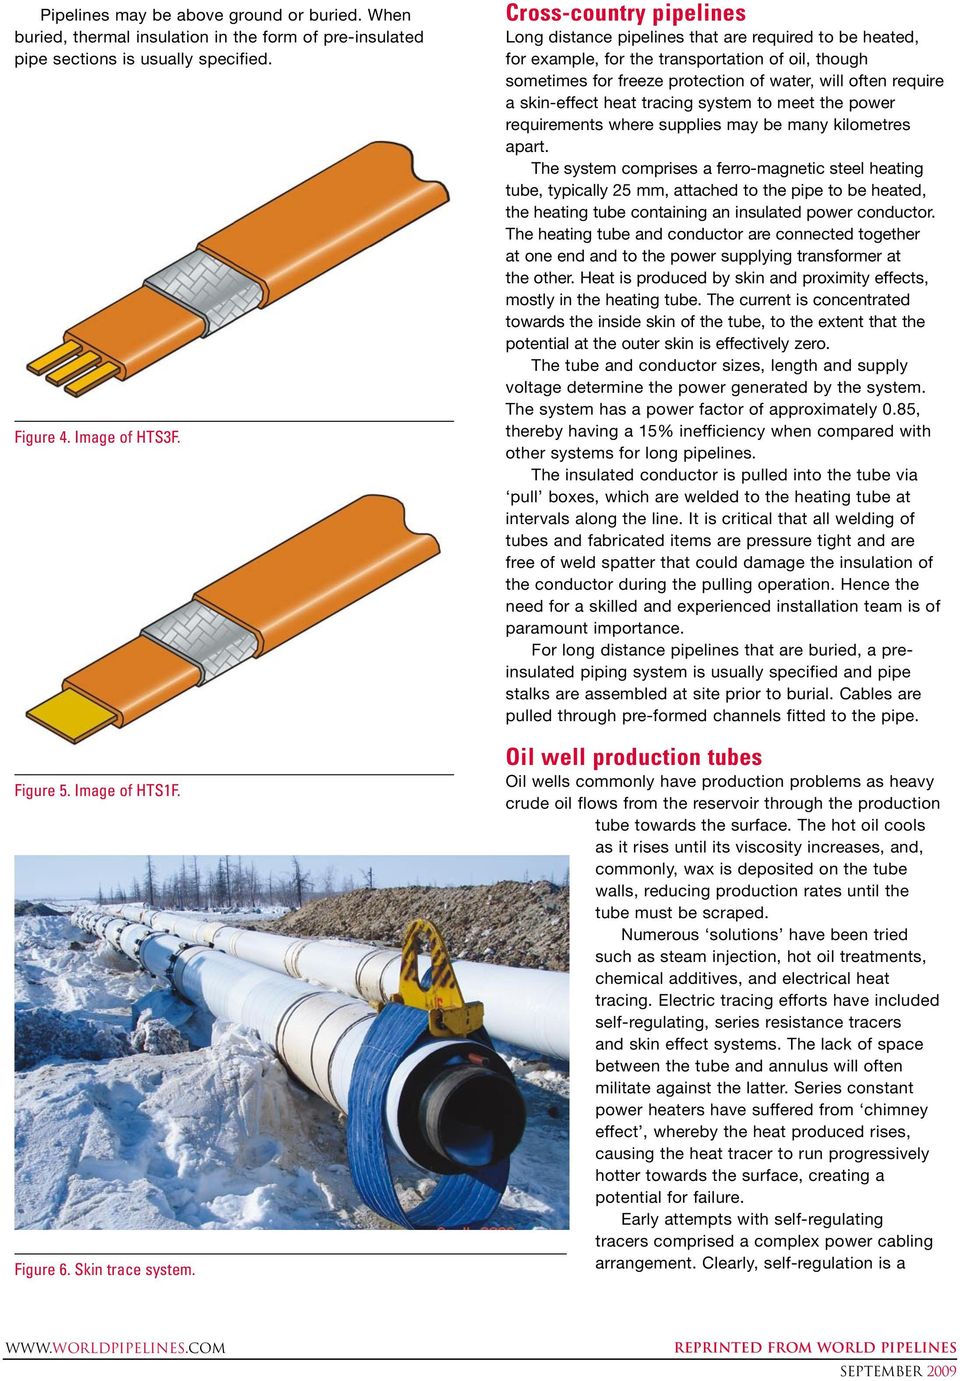 Cross-country pipelines Long distance pipelines that are required to be heated, for example, for the transportation of oil, though sometimes for freeze protection of water, will often require a